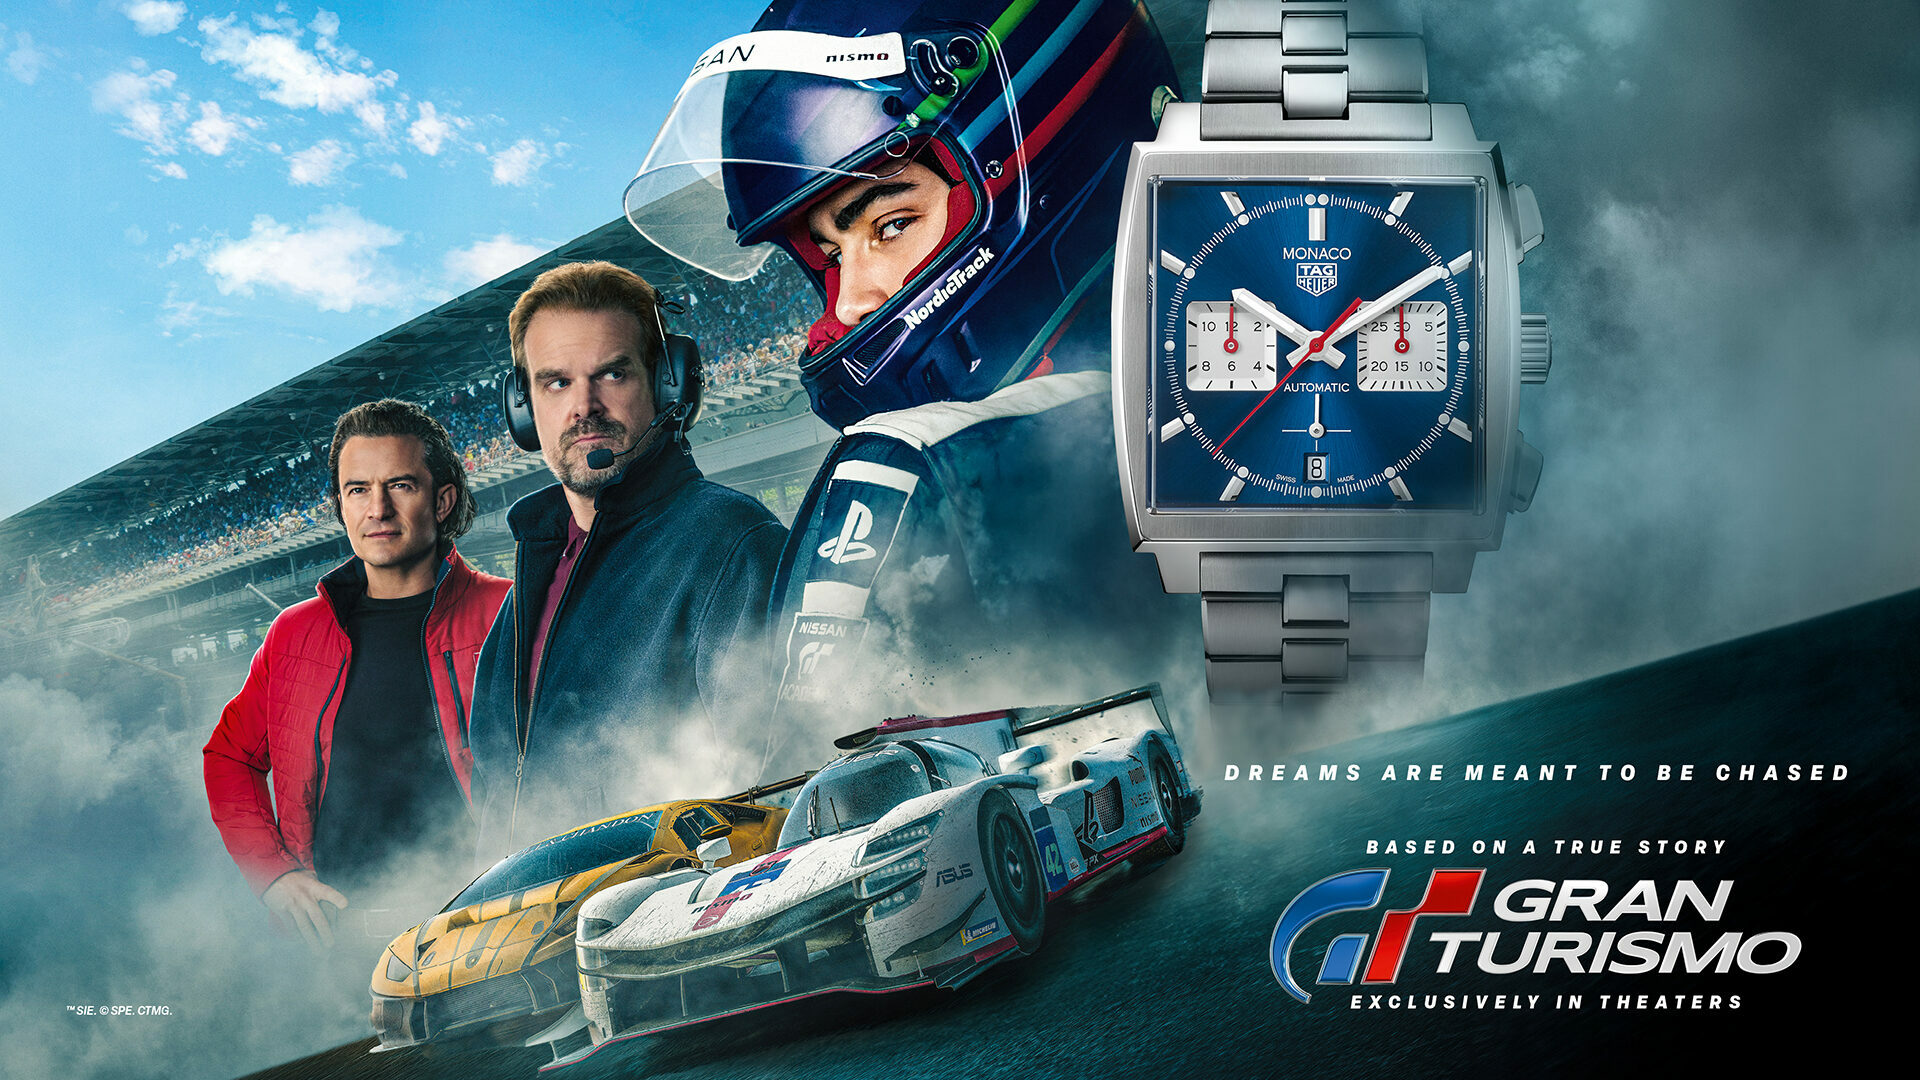 TAG HEUER MONACO HITS THE BIG SCREEN IN SONY PICTURES' UPCOMING